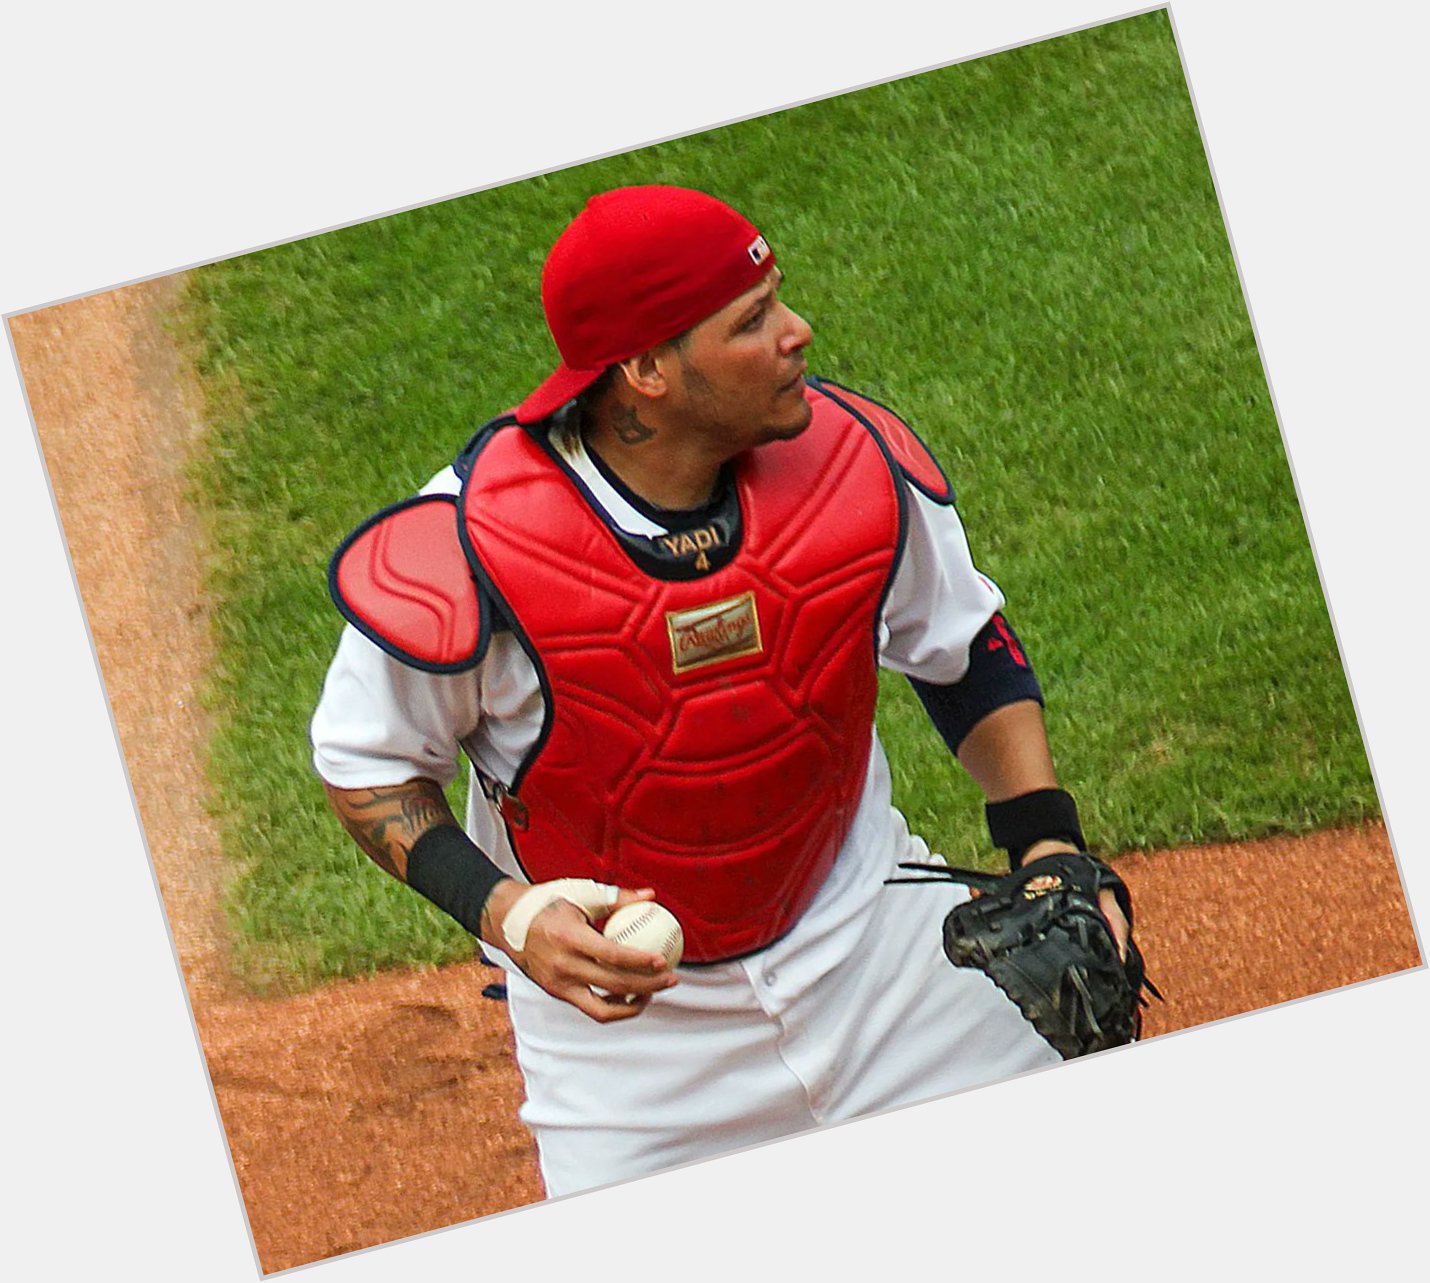 Happy Birthday to Yadier Molina! Born on this date in 1982.  